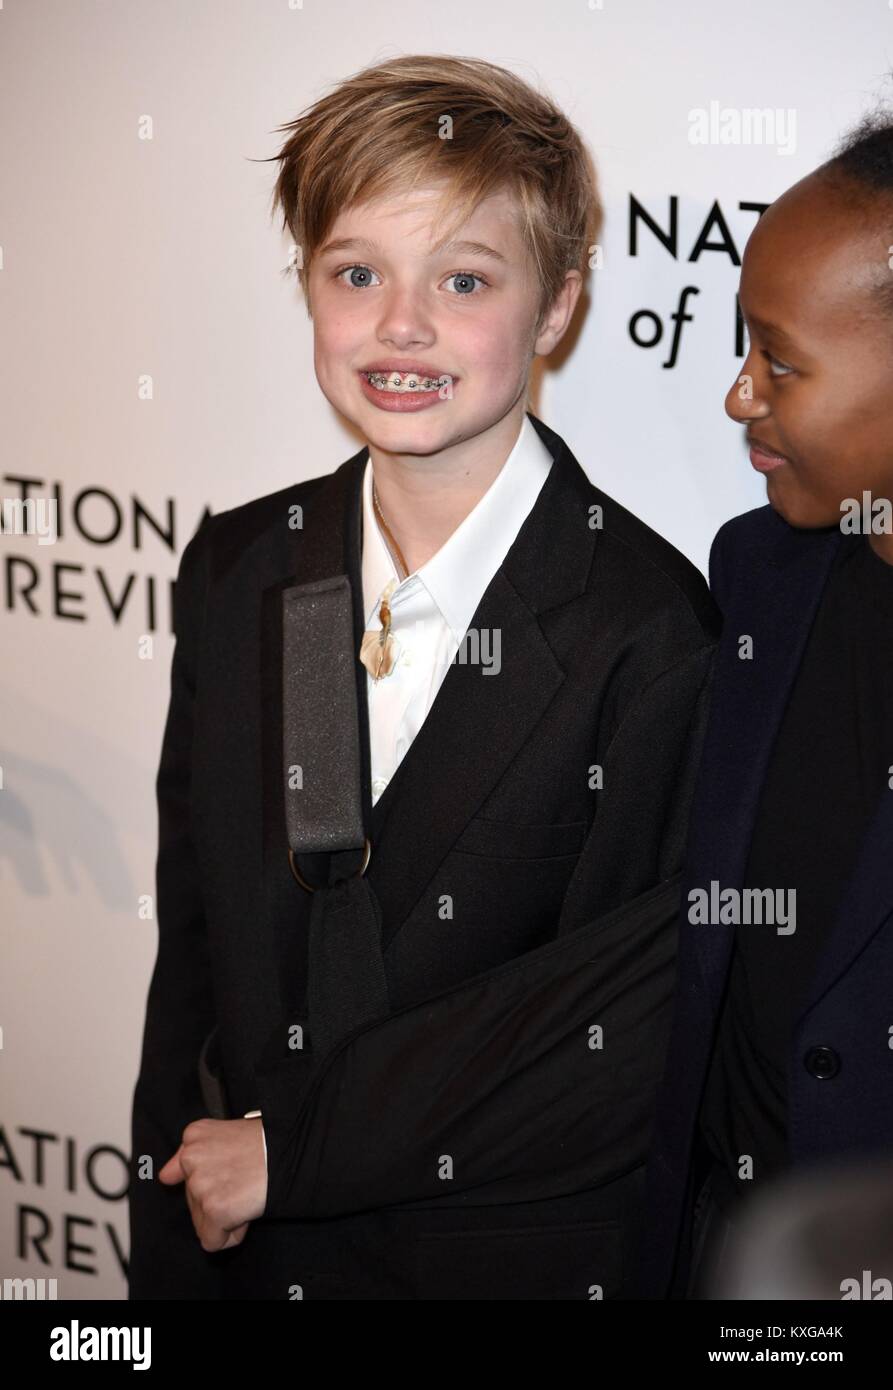 New York, NY, USA. 9th Jan, 2018. Shiloh Nouvel Jolie-Pitt at arrivals for The National Board of Review Awards 2018, Cipriani 42nd Street, New York, NY January 9, 2018. Credit: Derek Storm/Everett Collection/Alamy Live News Stock Photo